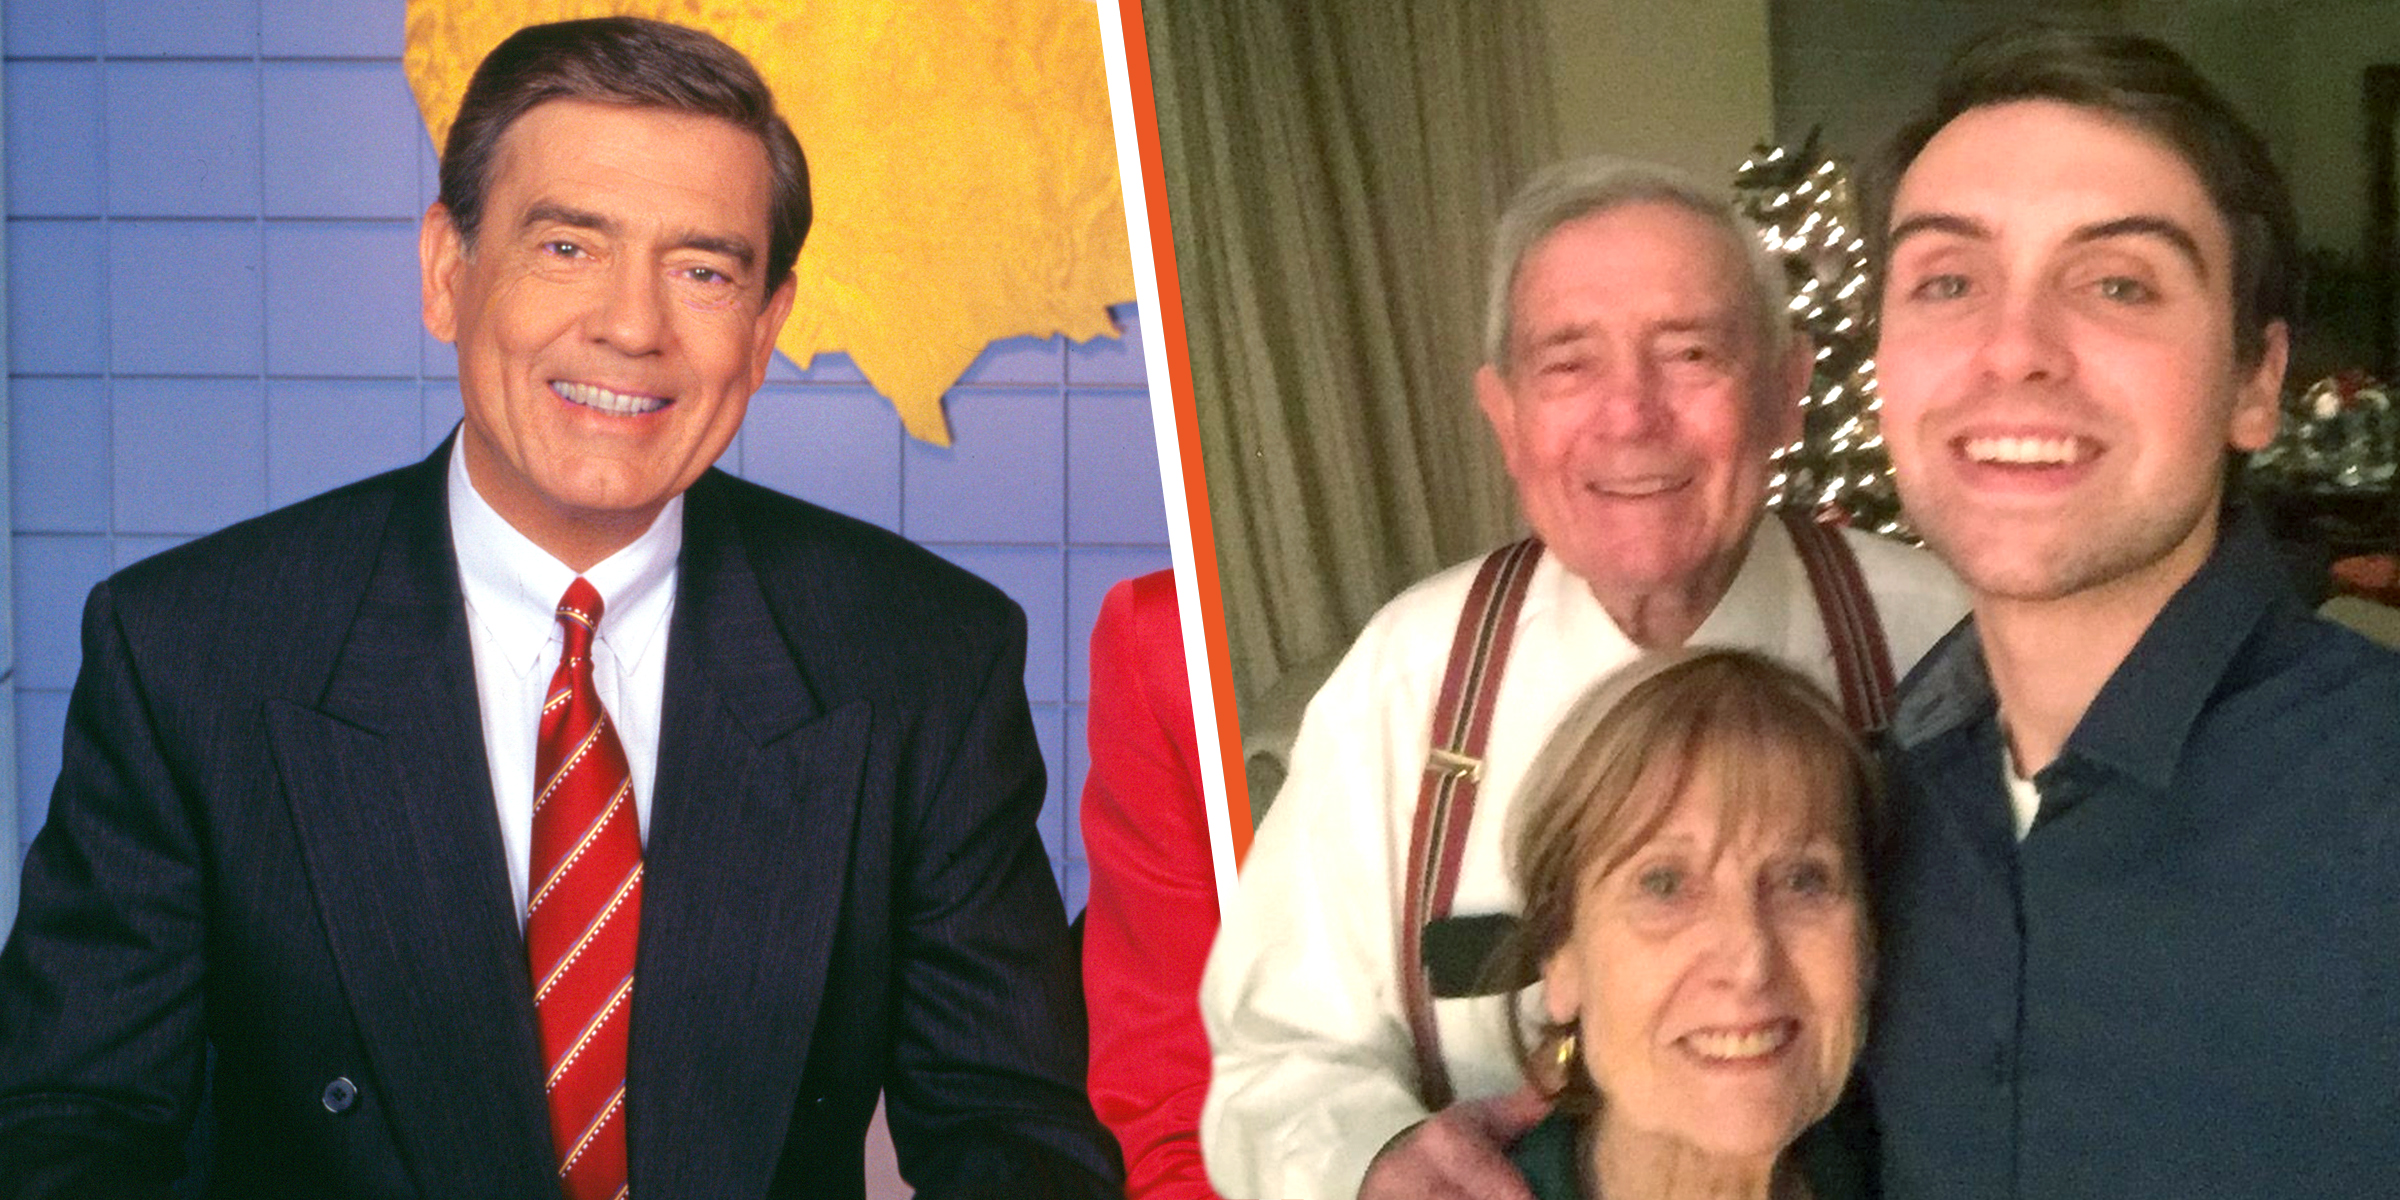 Dan Rather | Dan Rather with his wife Jean and grandson Martin | Source: Facebook.com/Dan Rather | Getty Images